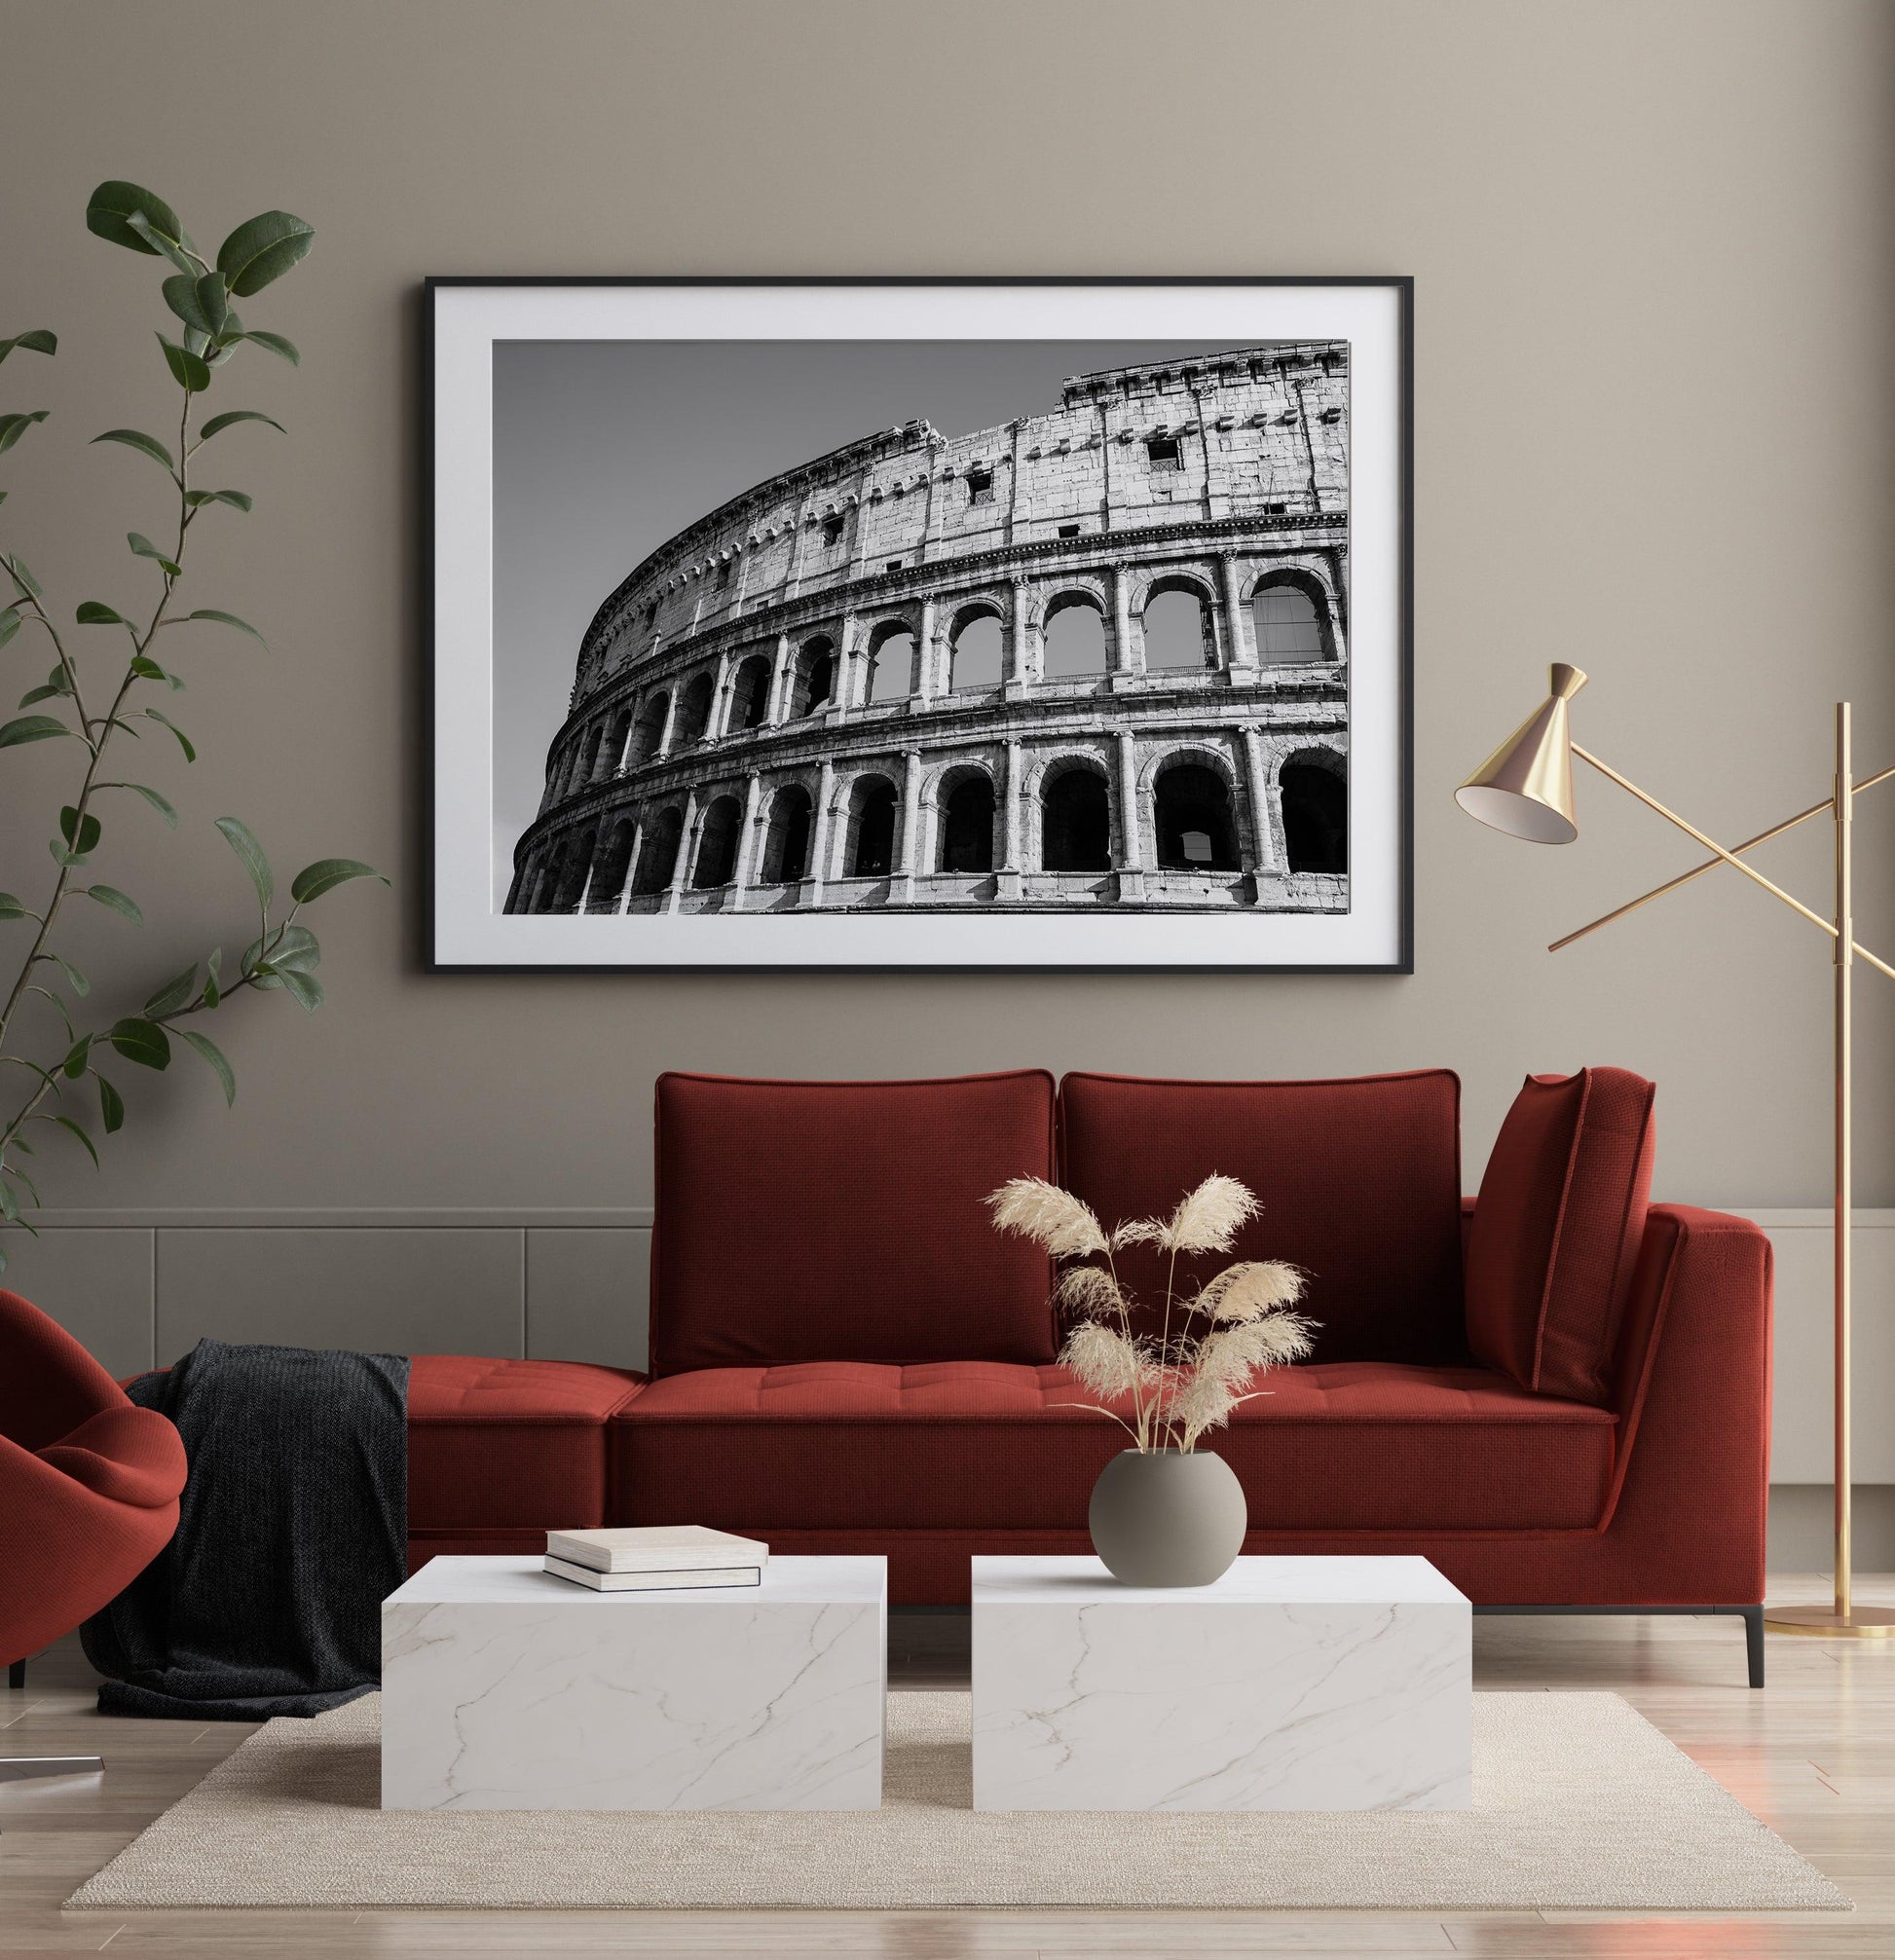 Black and White Roman Colosseum II | Rome Italy Photography - Departures Print Shop